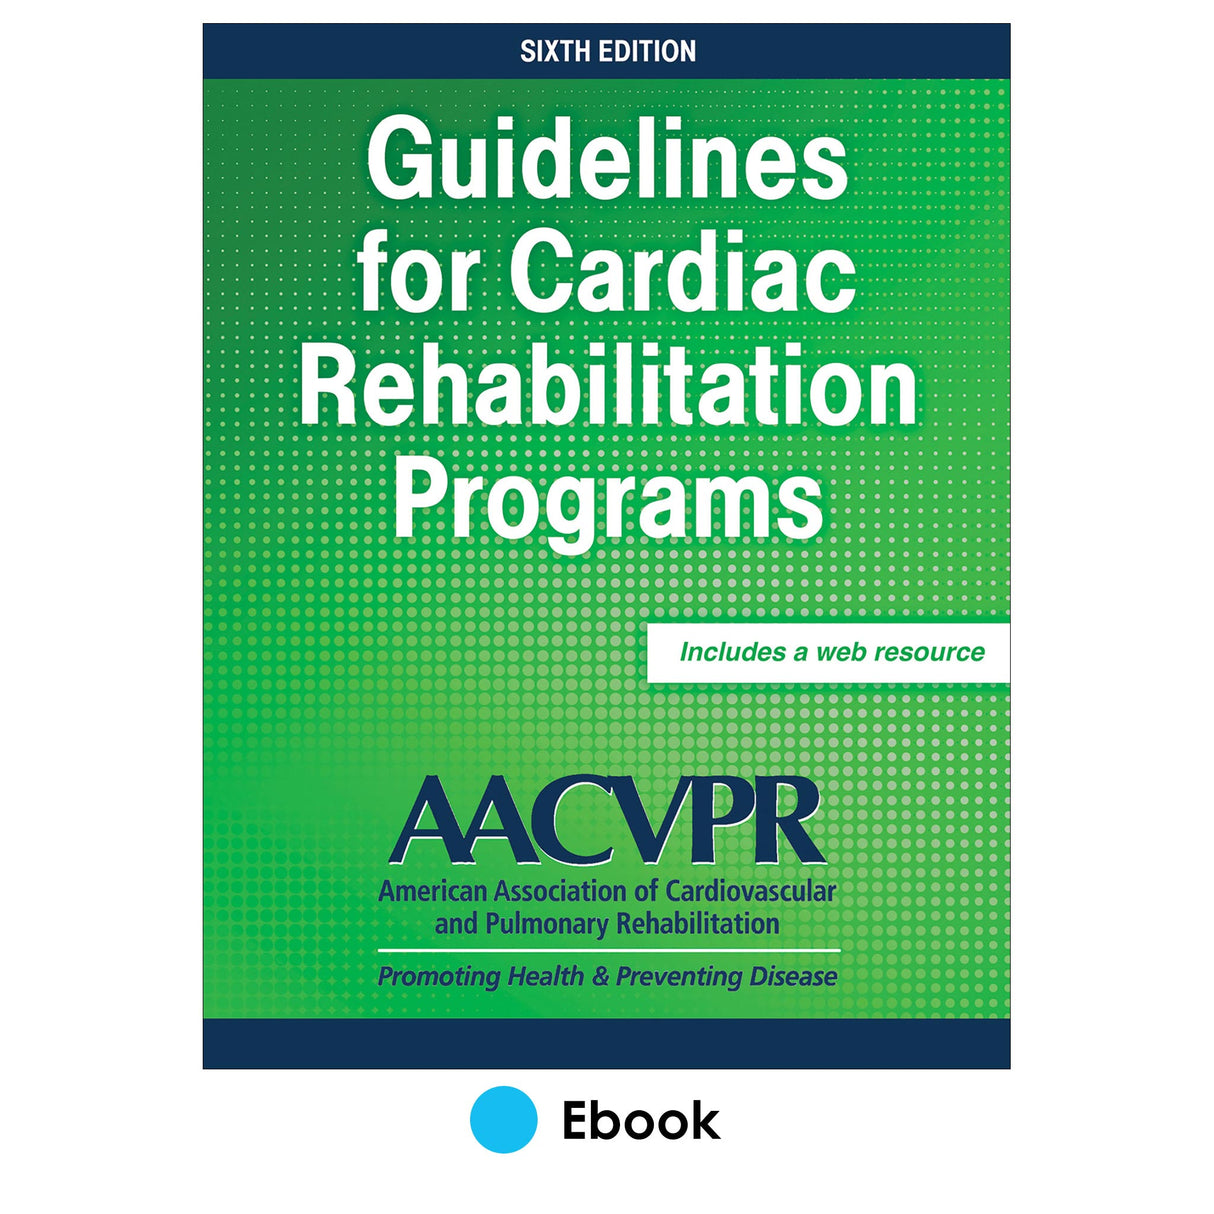 Guidelines for Cardiac Rehabilitation Programs 6th Edition epub With Web Resource